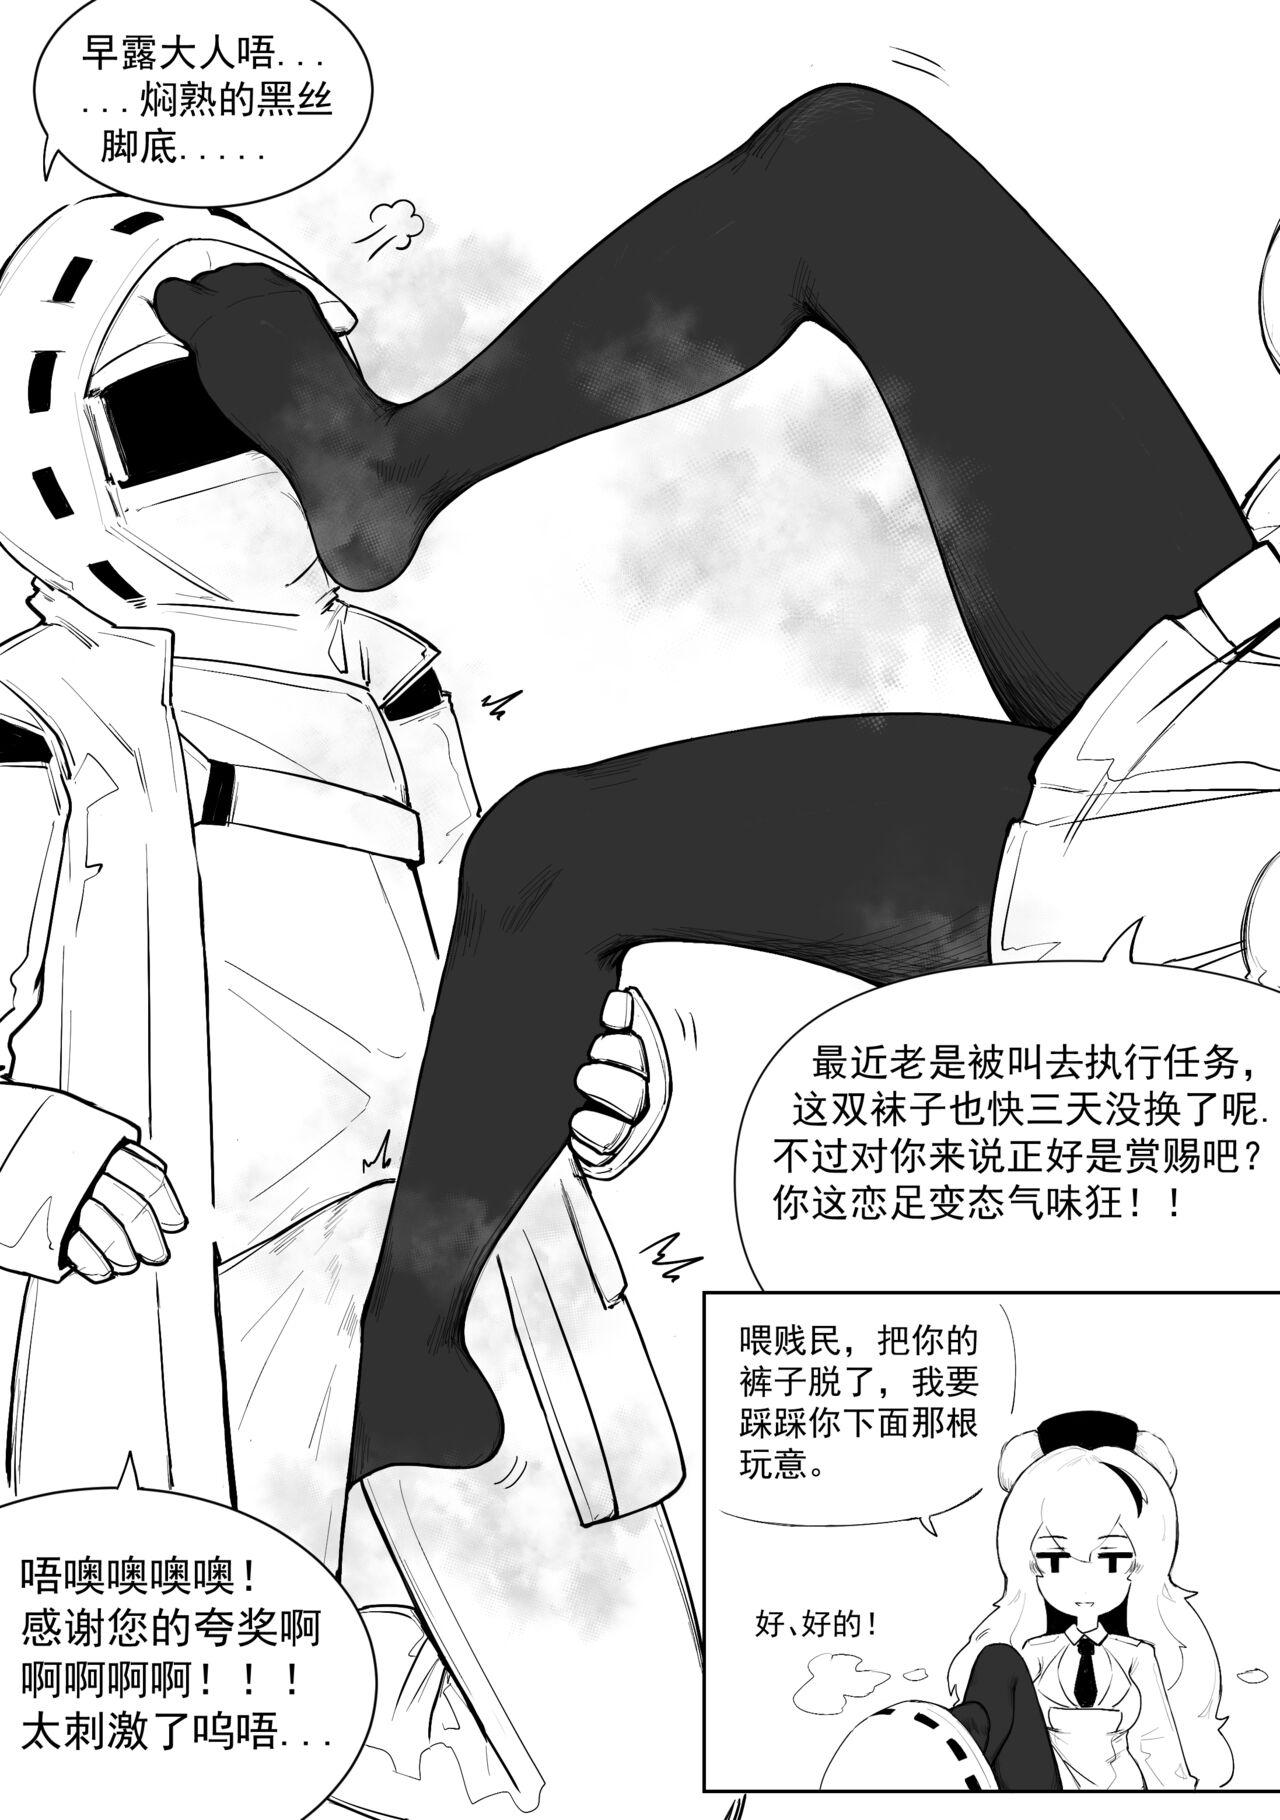 Tiny Girl 澄澈之冰 早露 - Arknights Athletic - Page 3